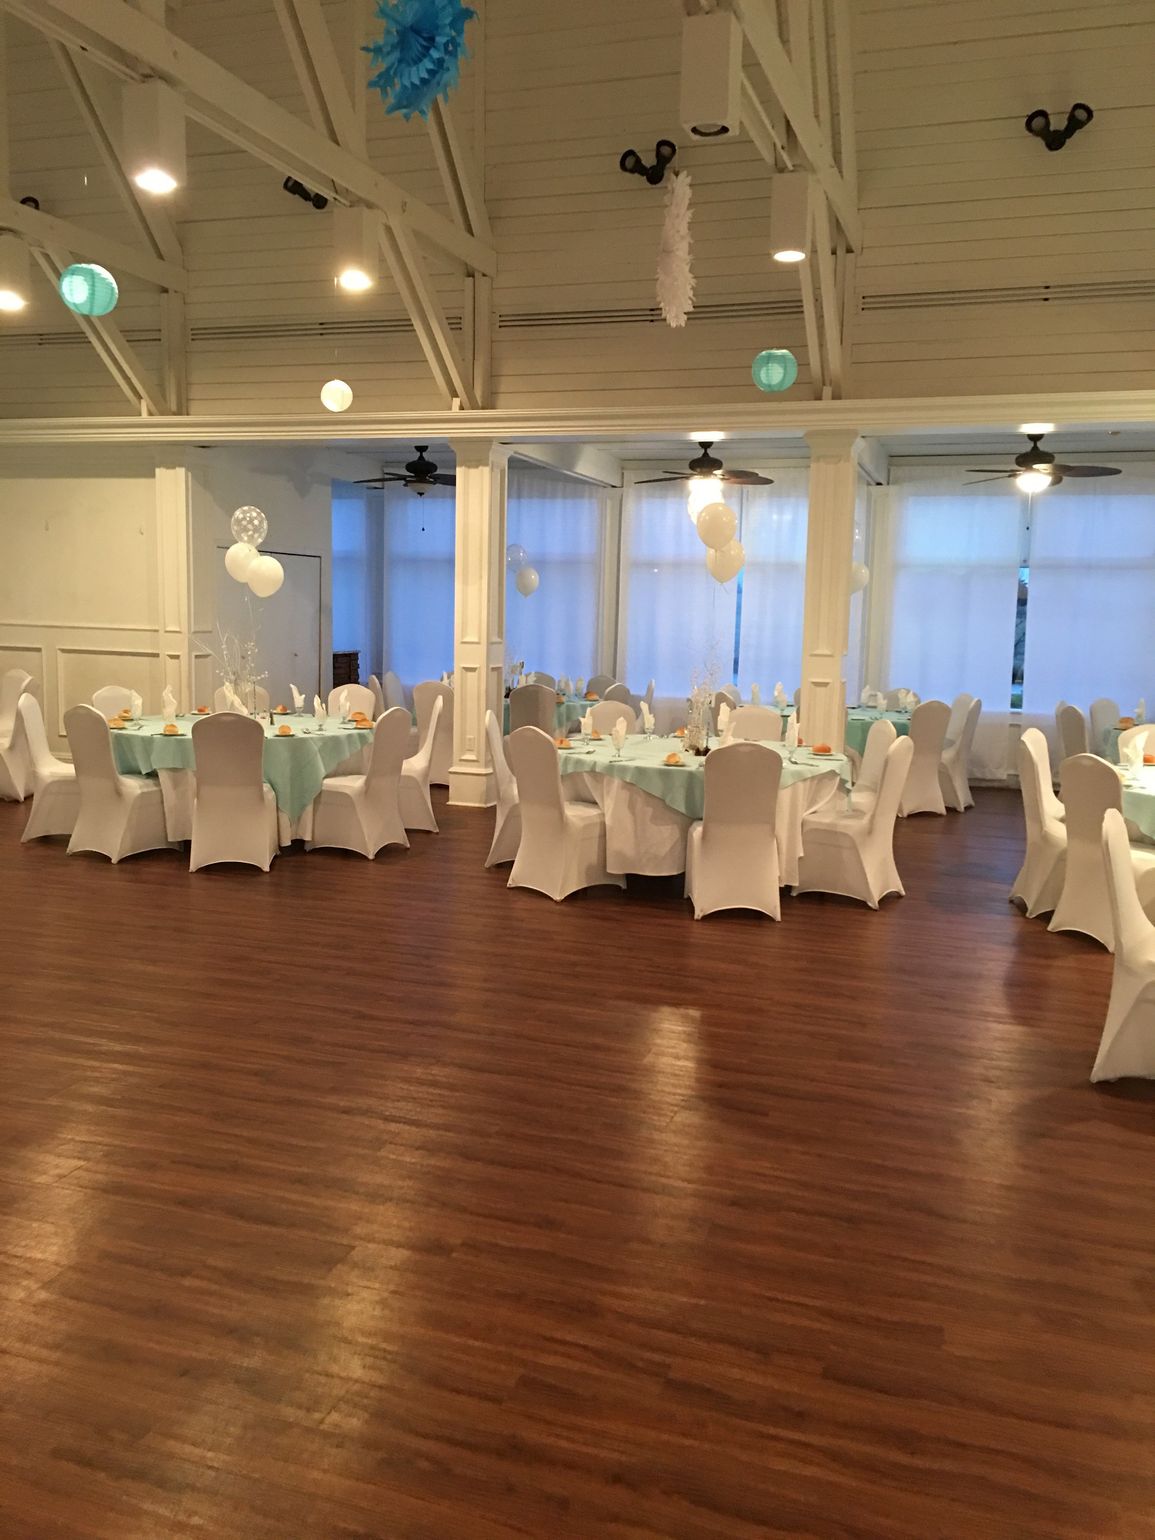 Sitting Arrangement at an event with white and blue balloons 1